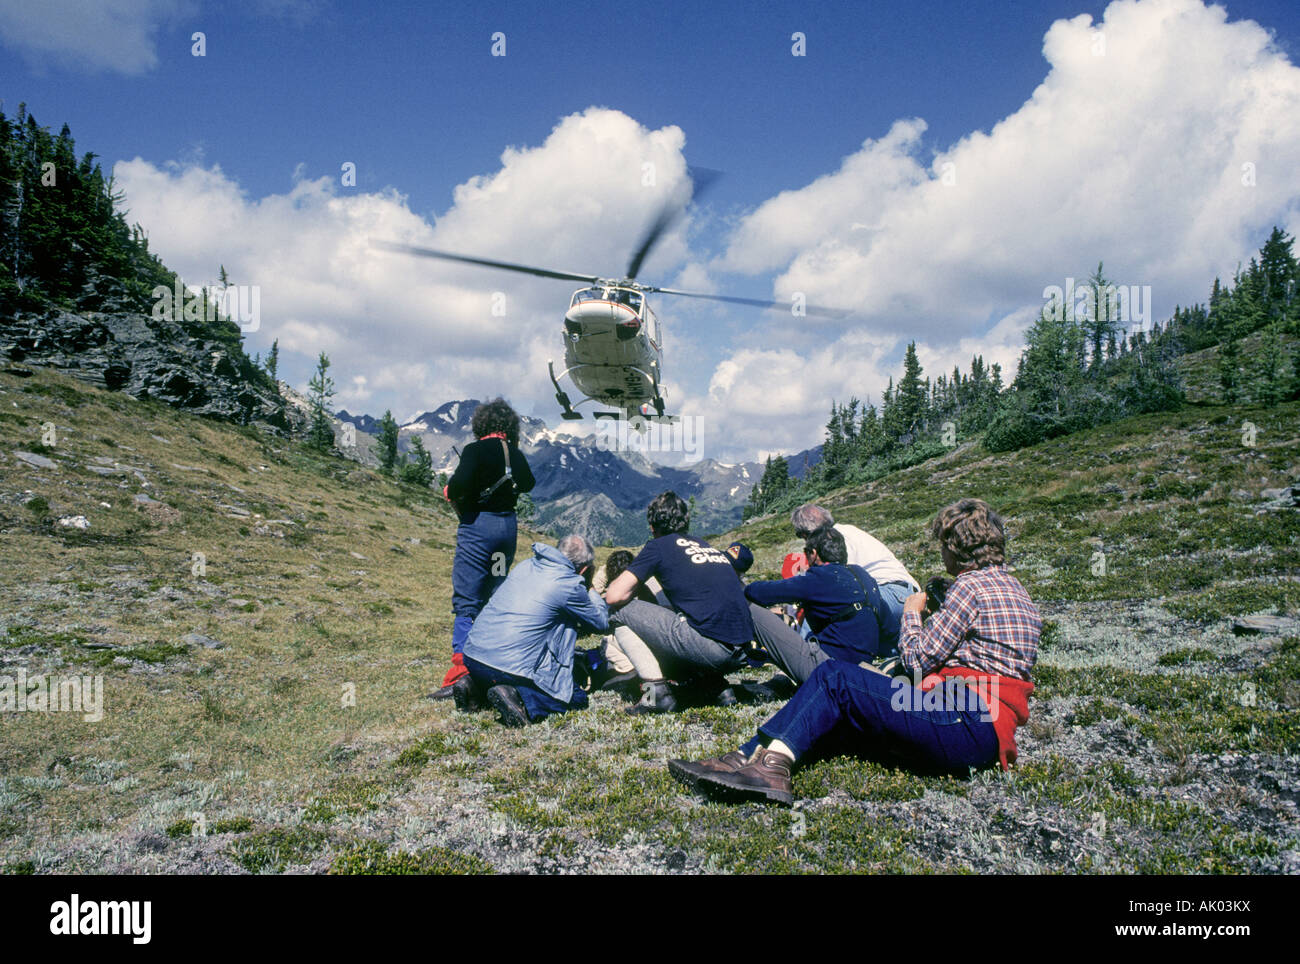 Helihikers prepare to board a helicopter in the high country of the Bugaboo Mountains in British Columbia Stock Photo